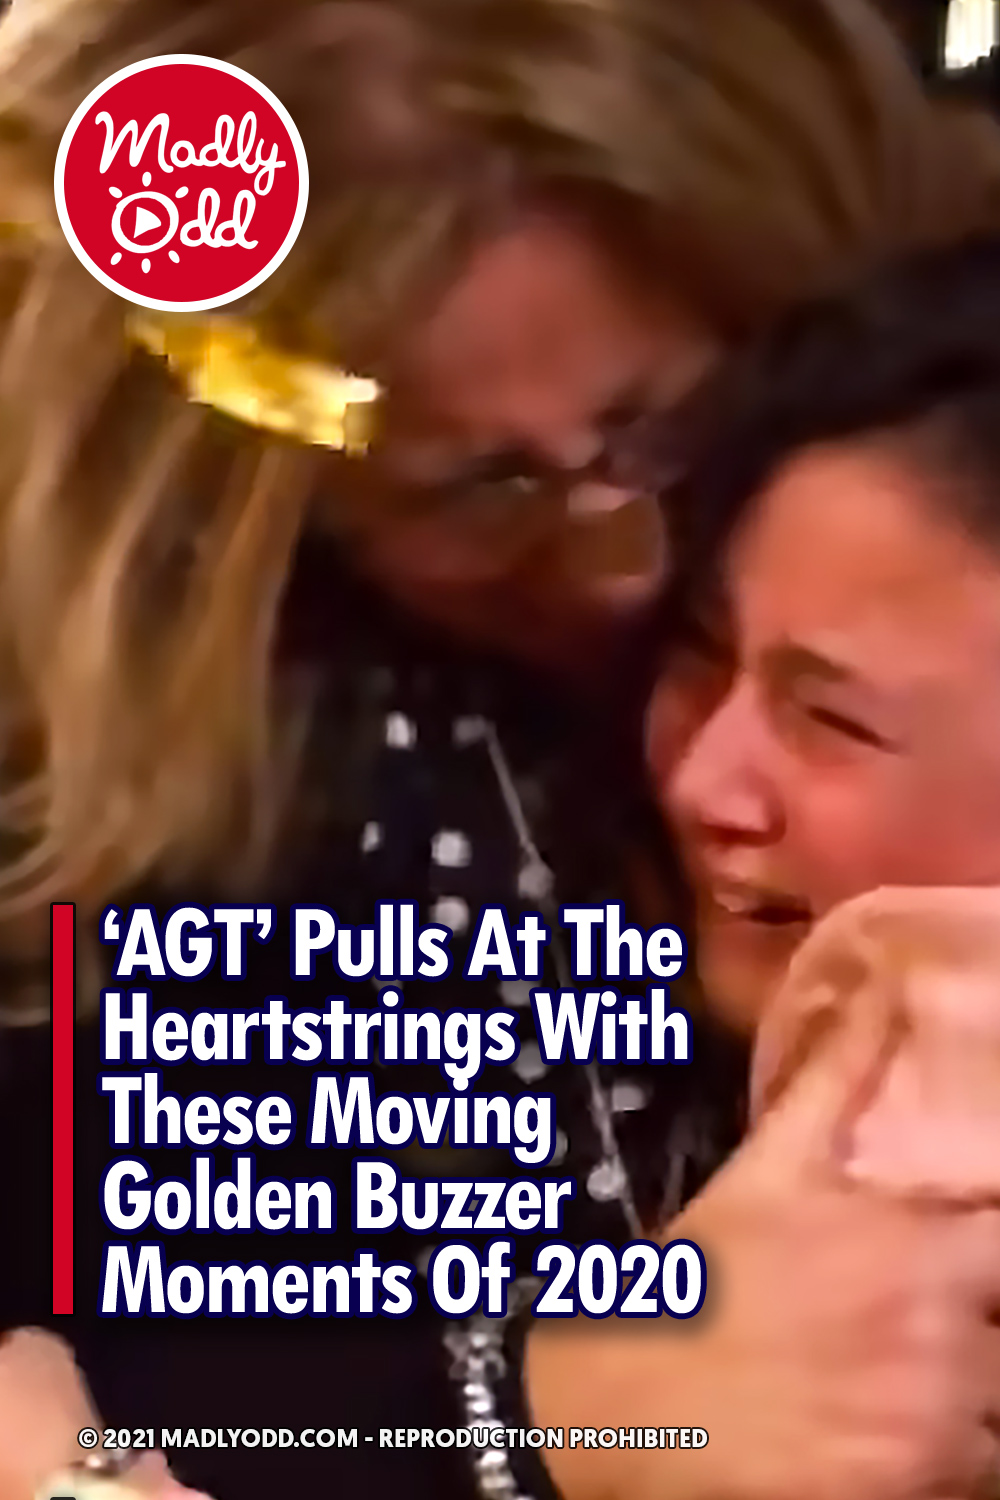 ‘AGT’ Pulls At The Heartstrings With These Moving Golden Buzzer Moments Of 2020